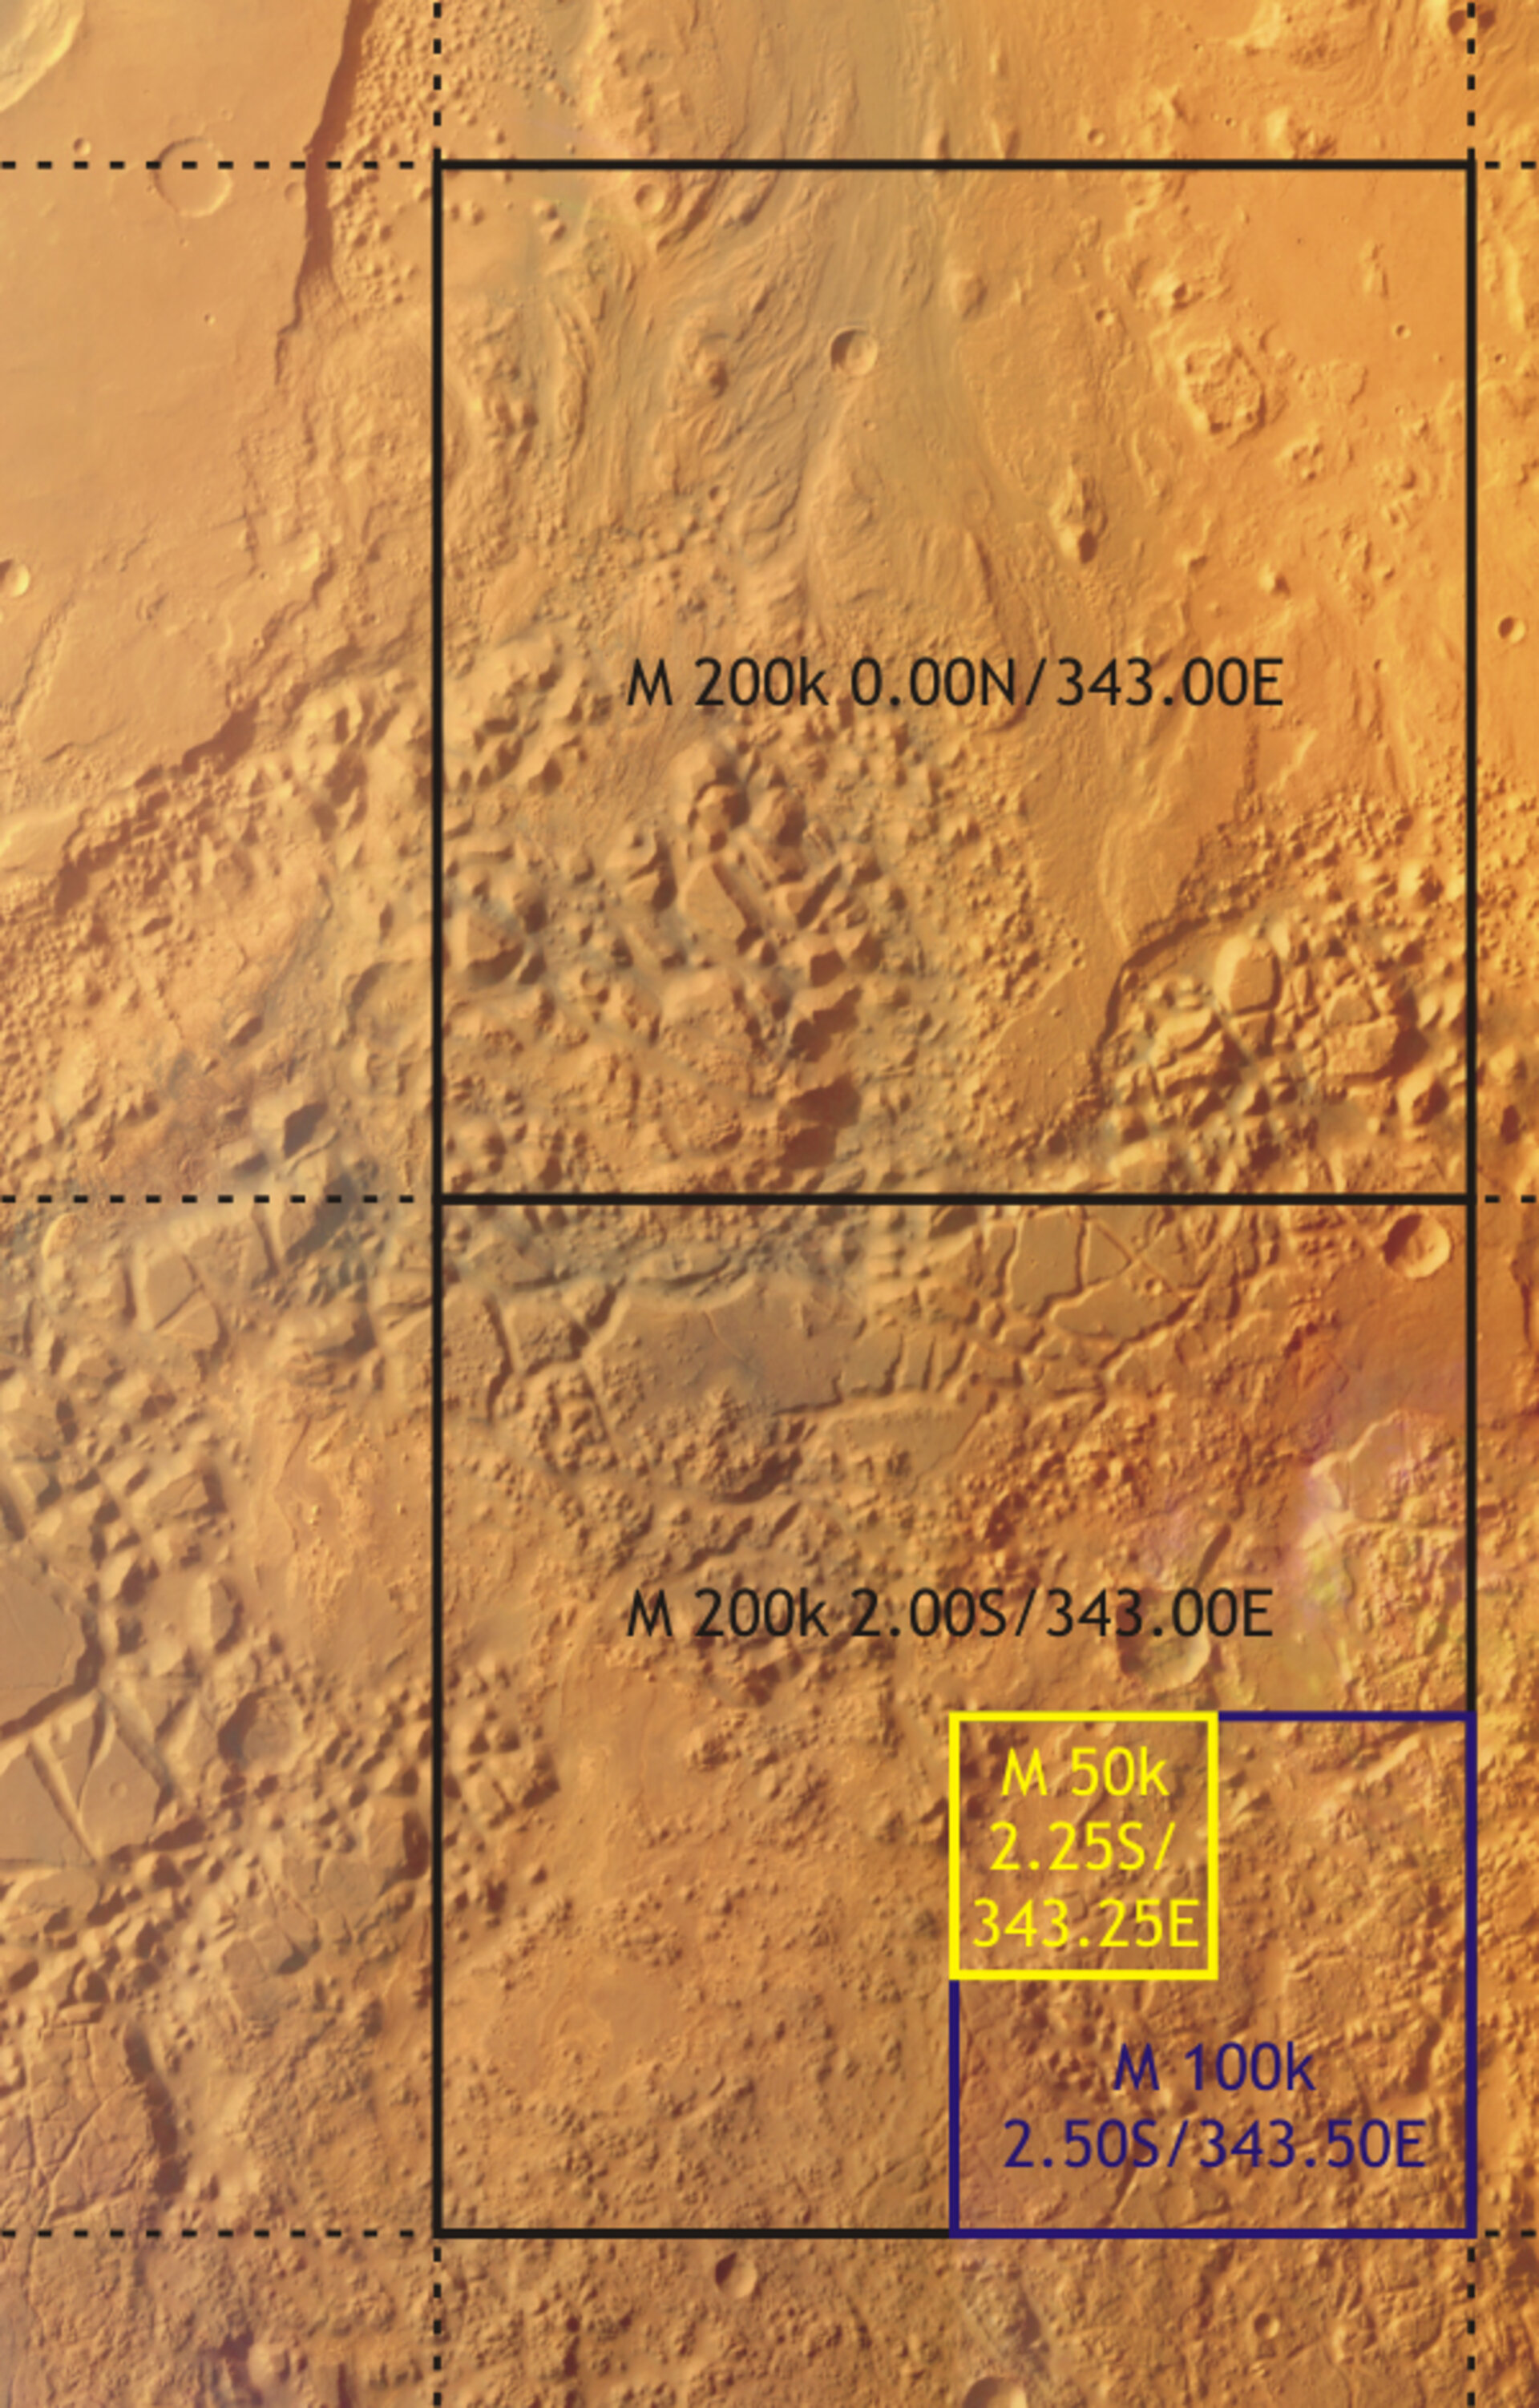 Possible scales of topographic maps of Mars